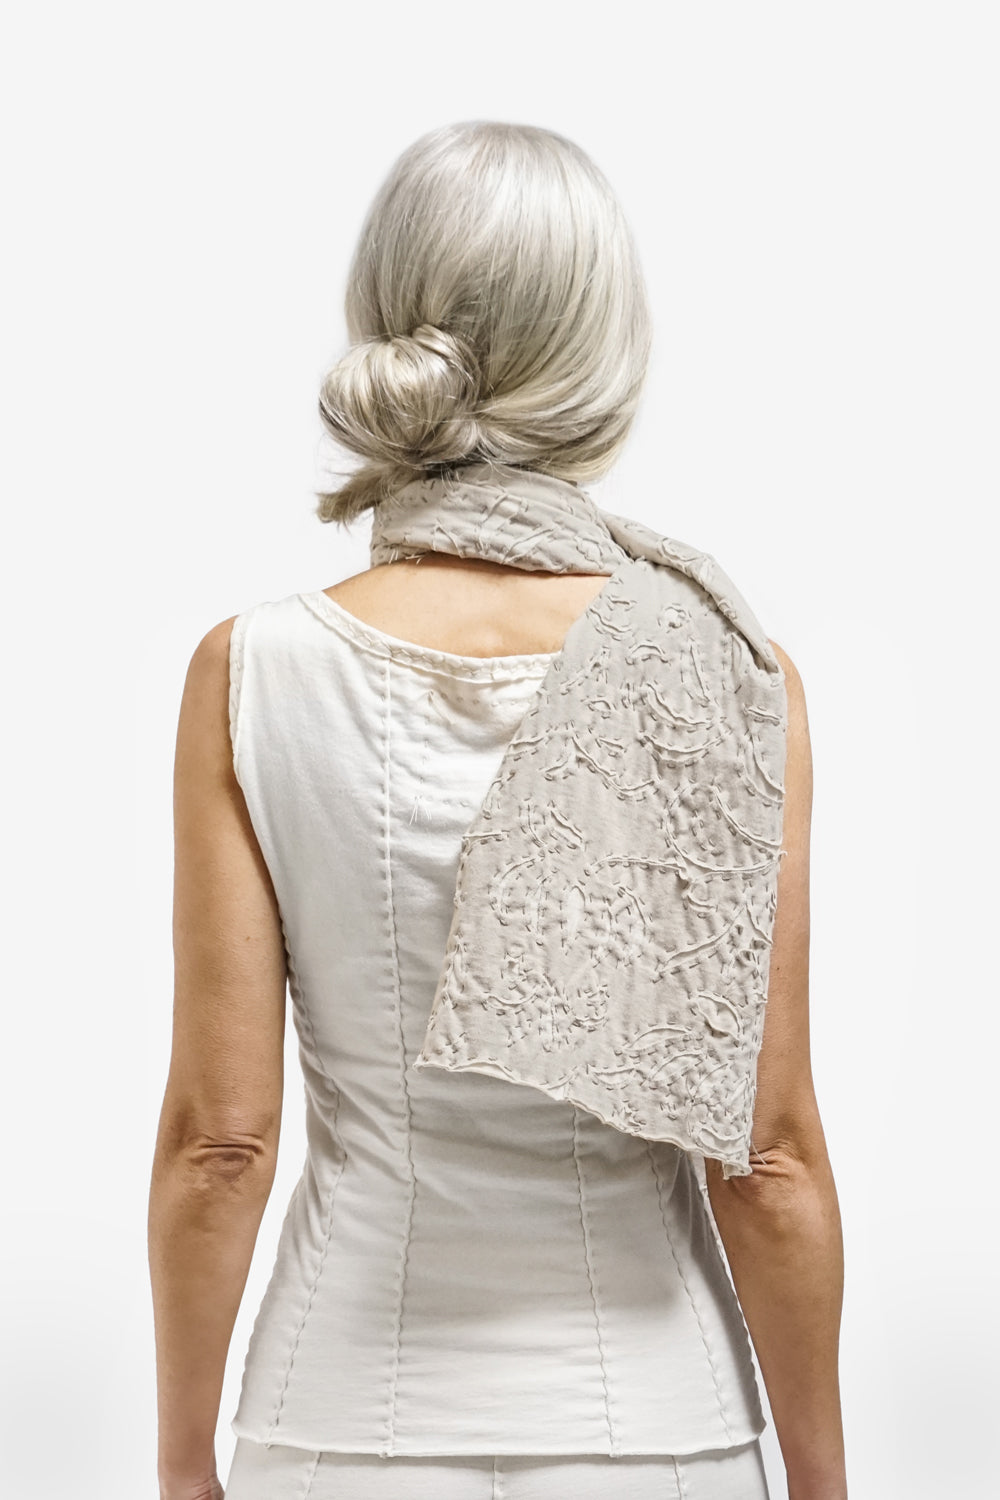 Model wearing the scarf in sand and natural, with Anna's Garden reverse appliqué.